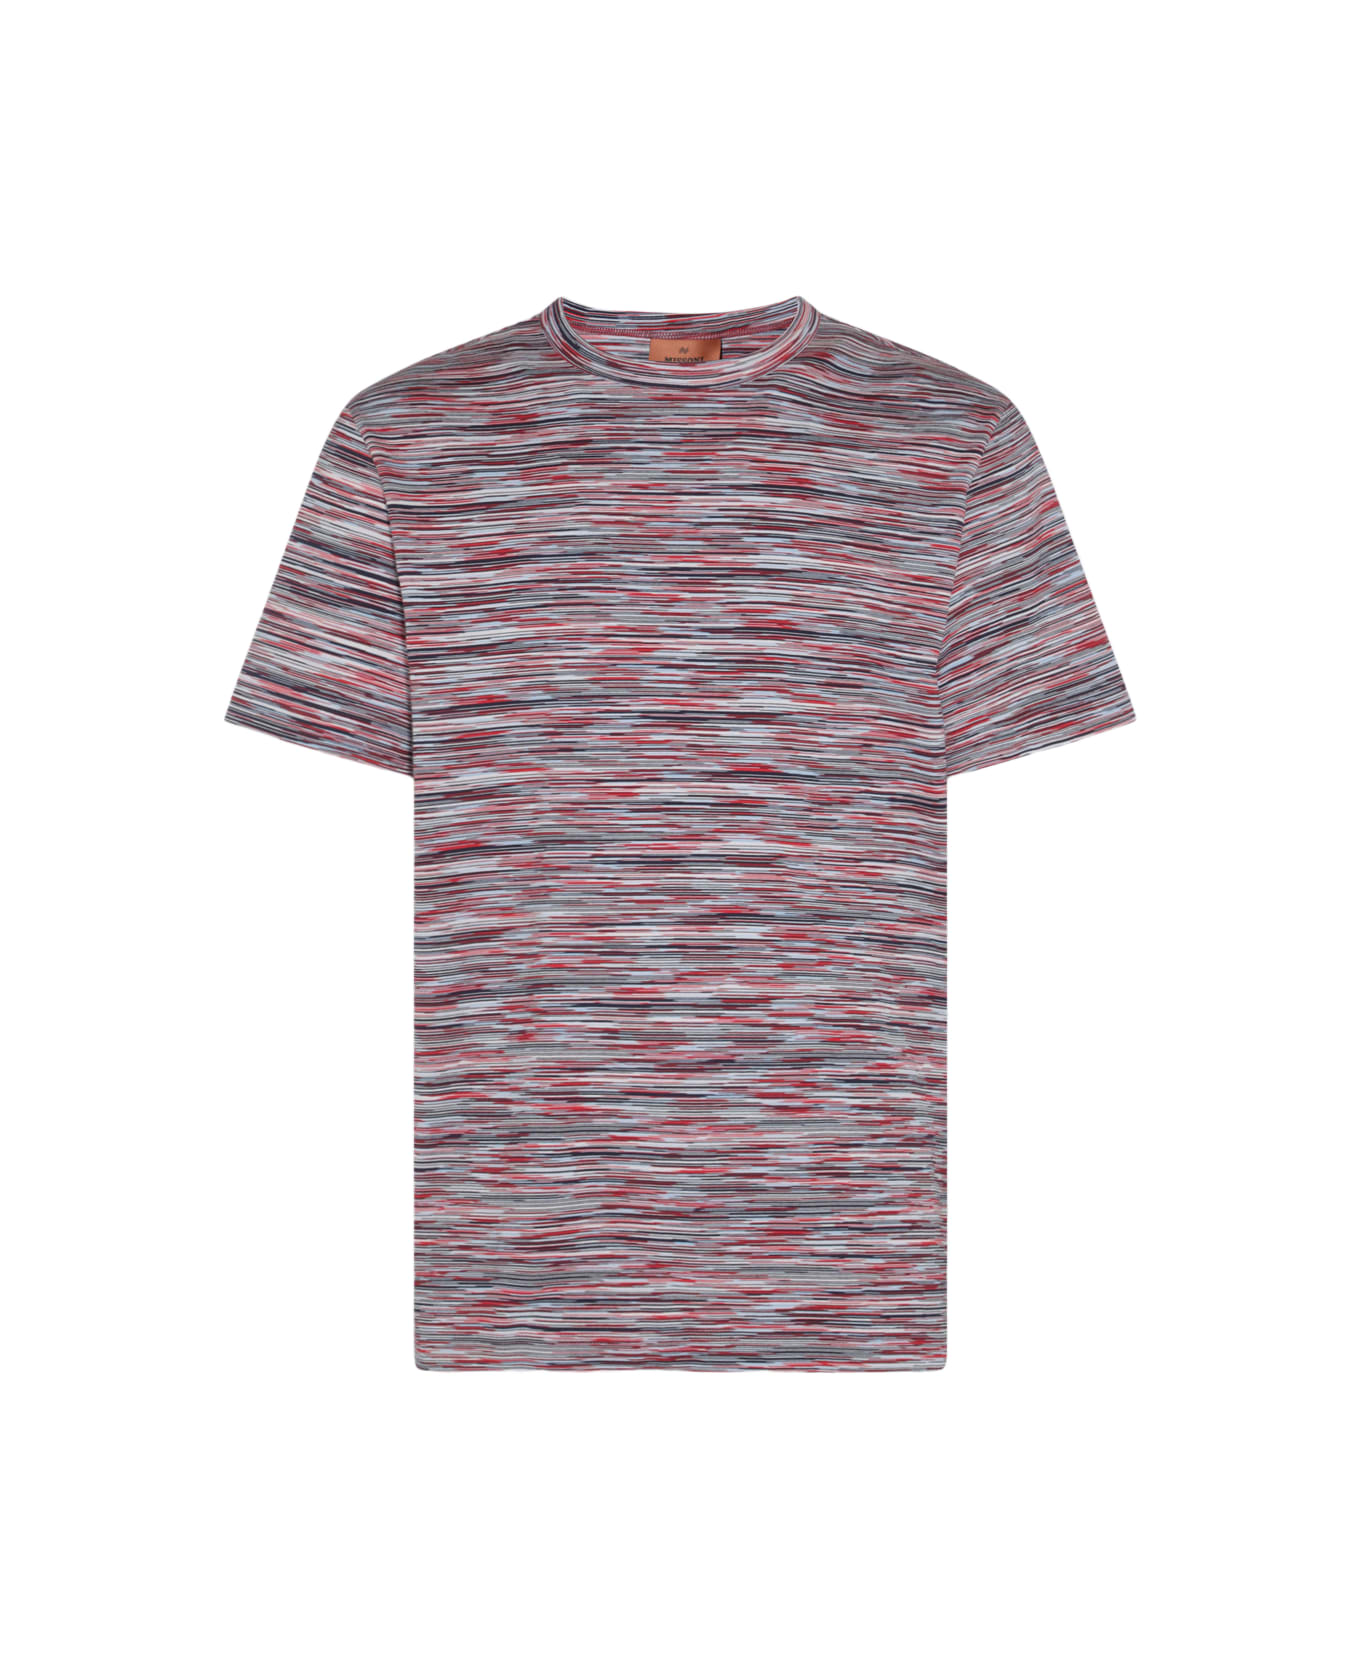 Missoni Multicolor Cotton T-shirt - RED AND BLUE SPACE DYED シャツ